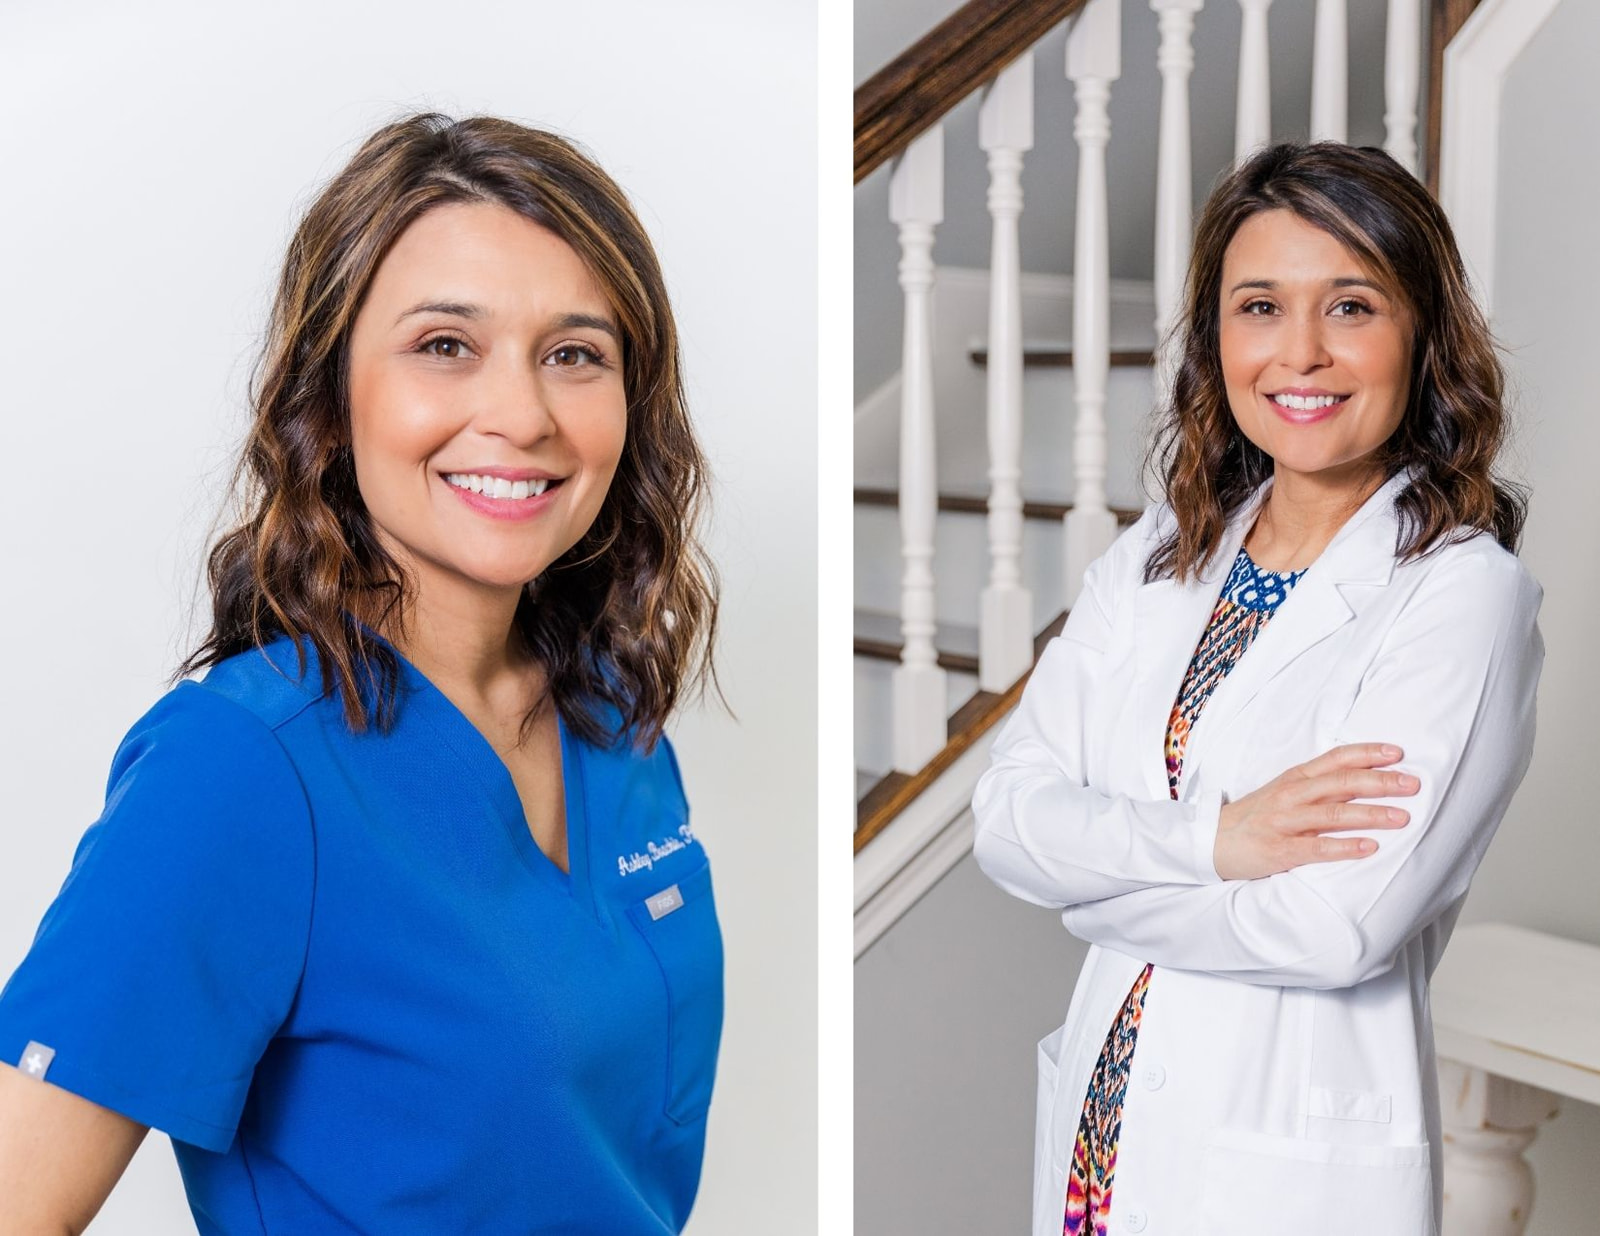 2 different styles headshots for a doctor by Laure Photography in Atlanta GA